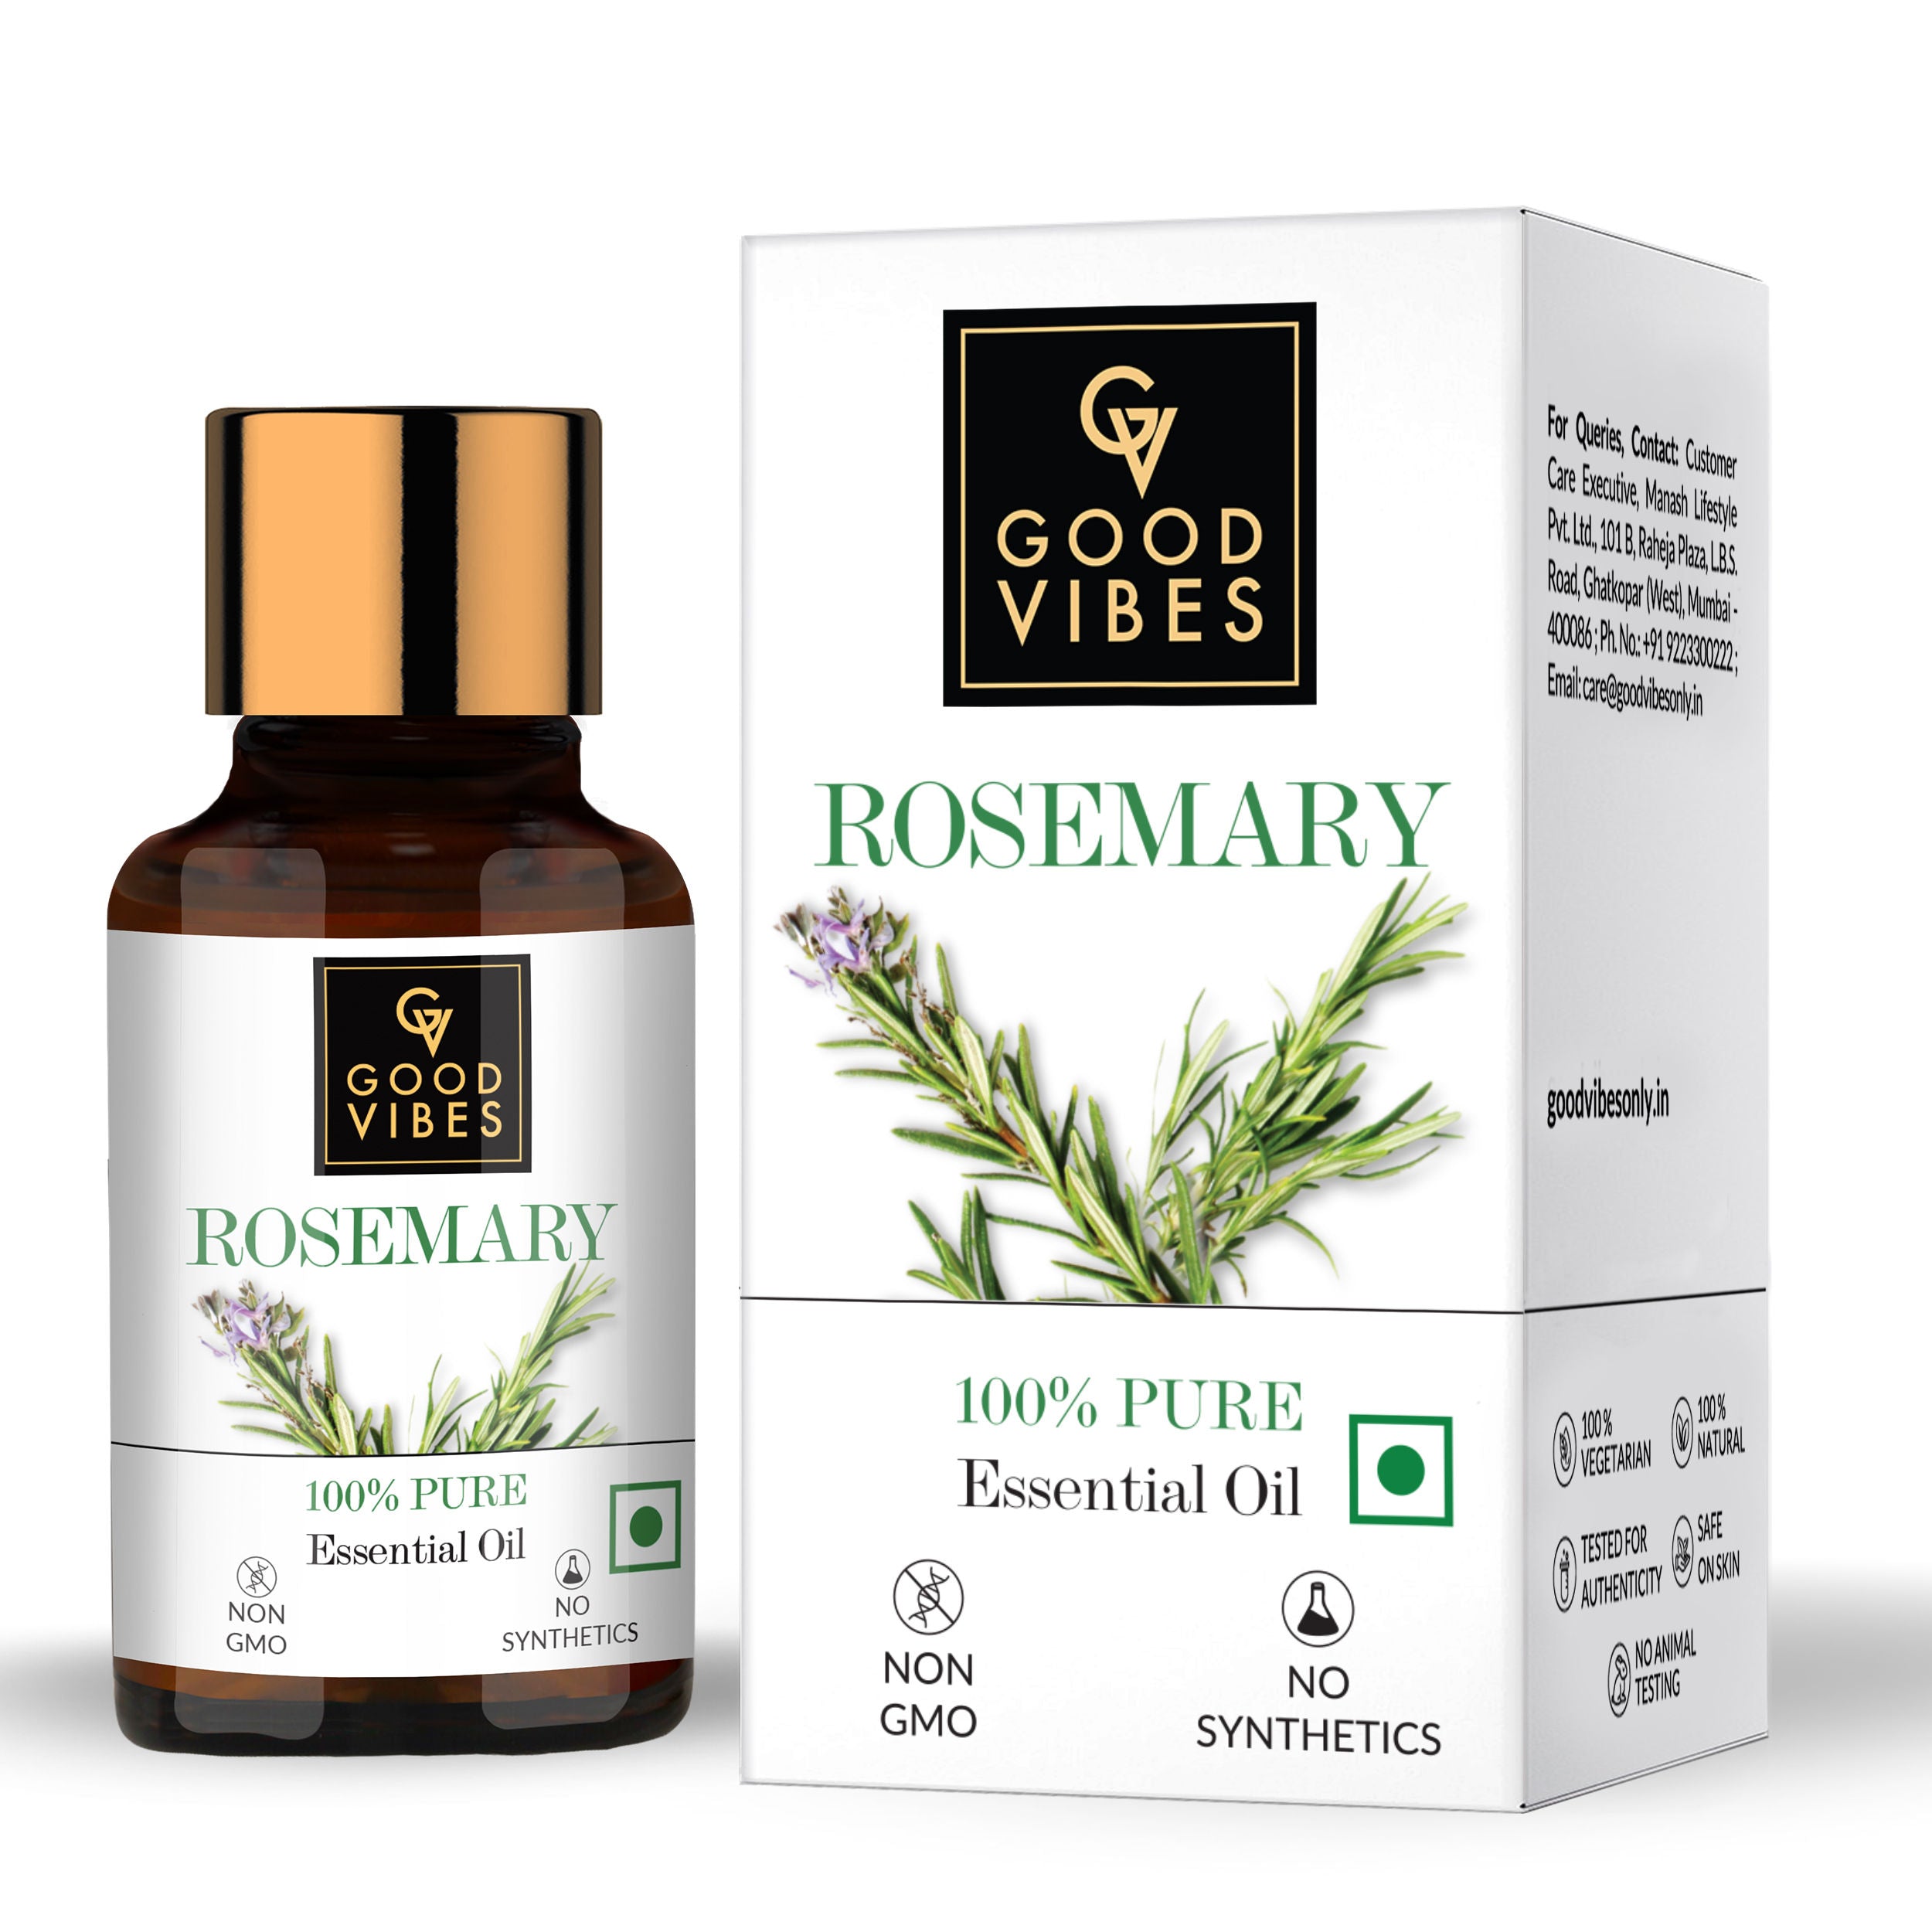 Rosemary 100% Pure Essential Oil – Good Vibes